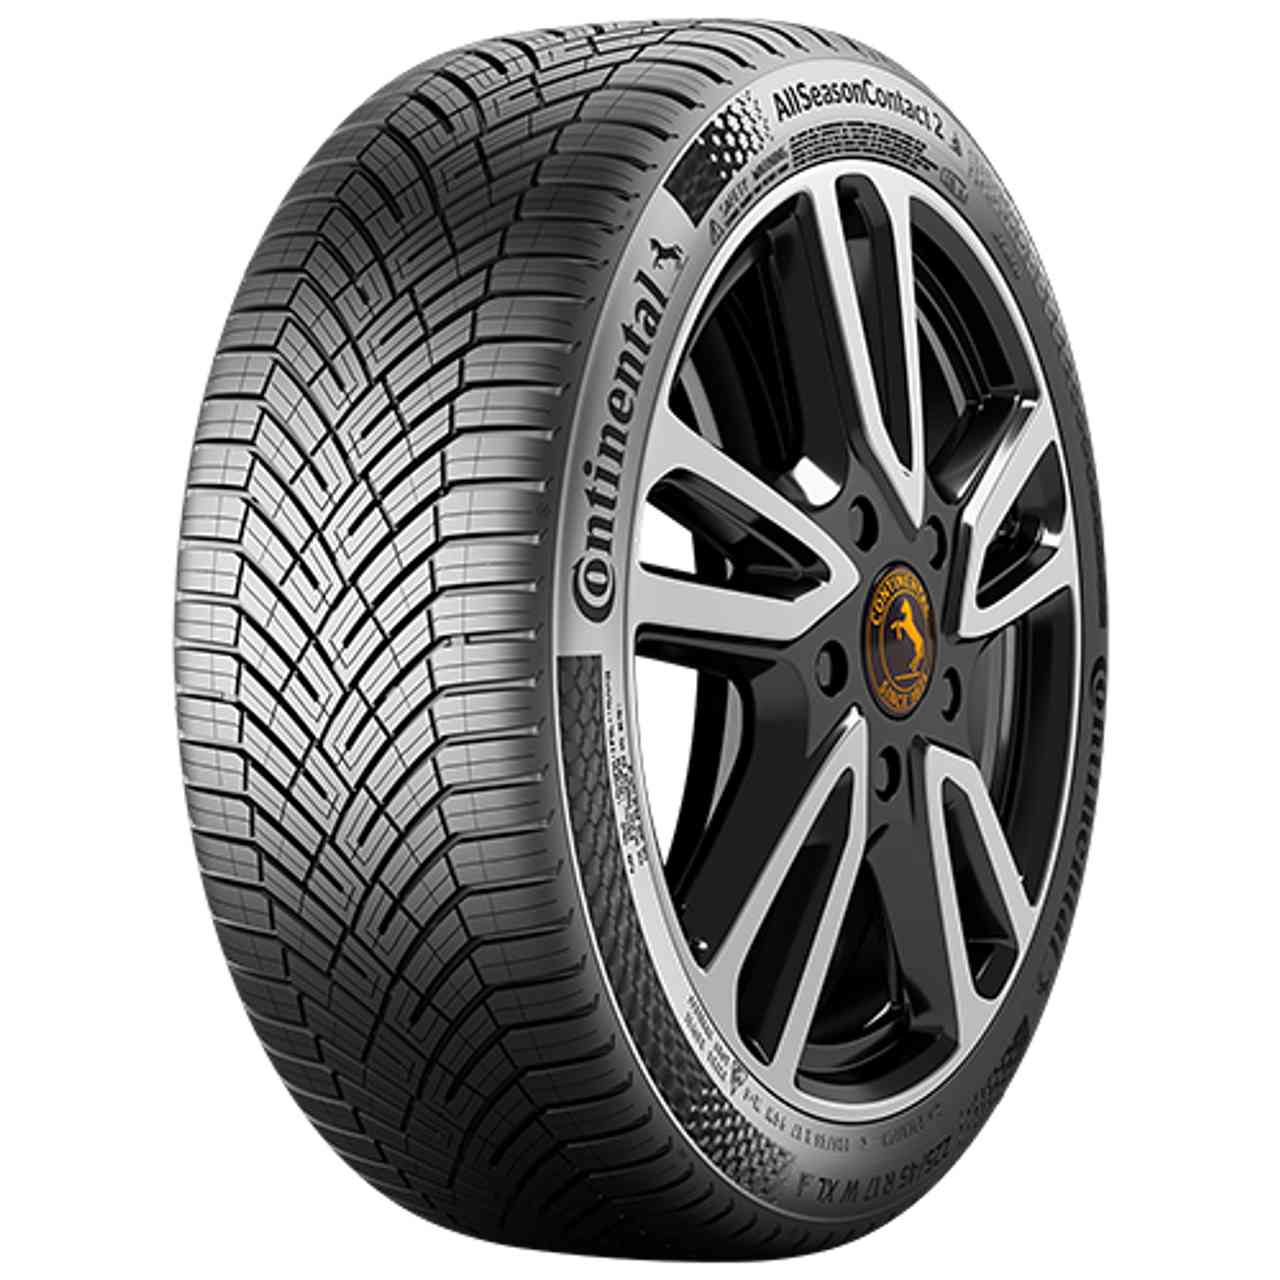 CONTINENTAL ALLSEASONCONTACT 2 (EVc) 165/60R15 77H BSW